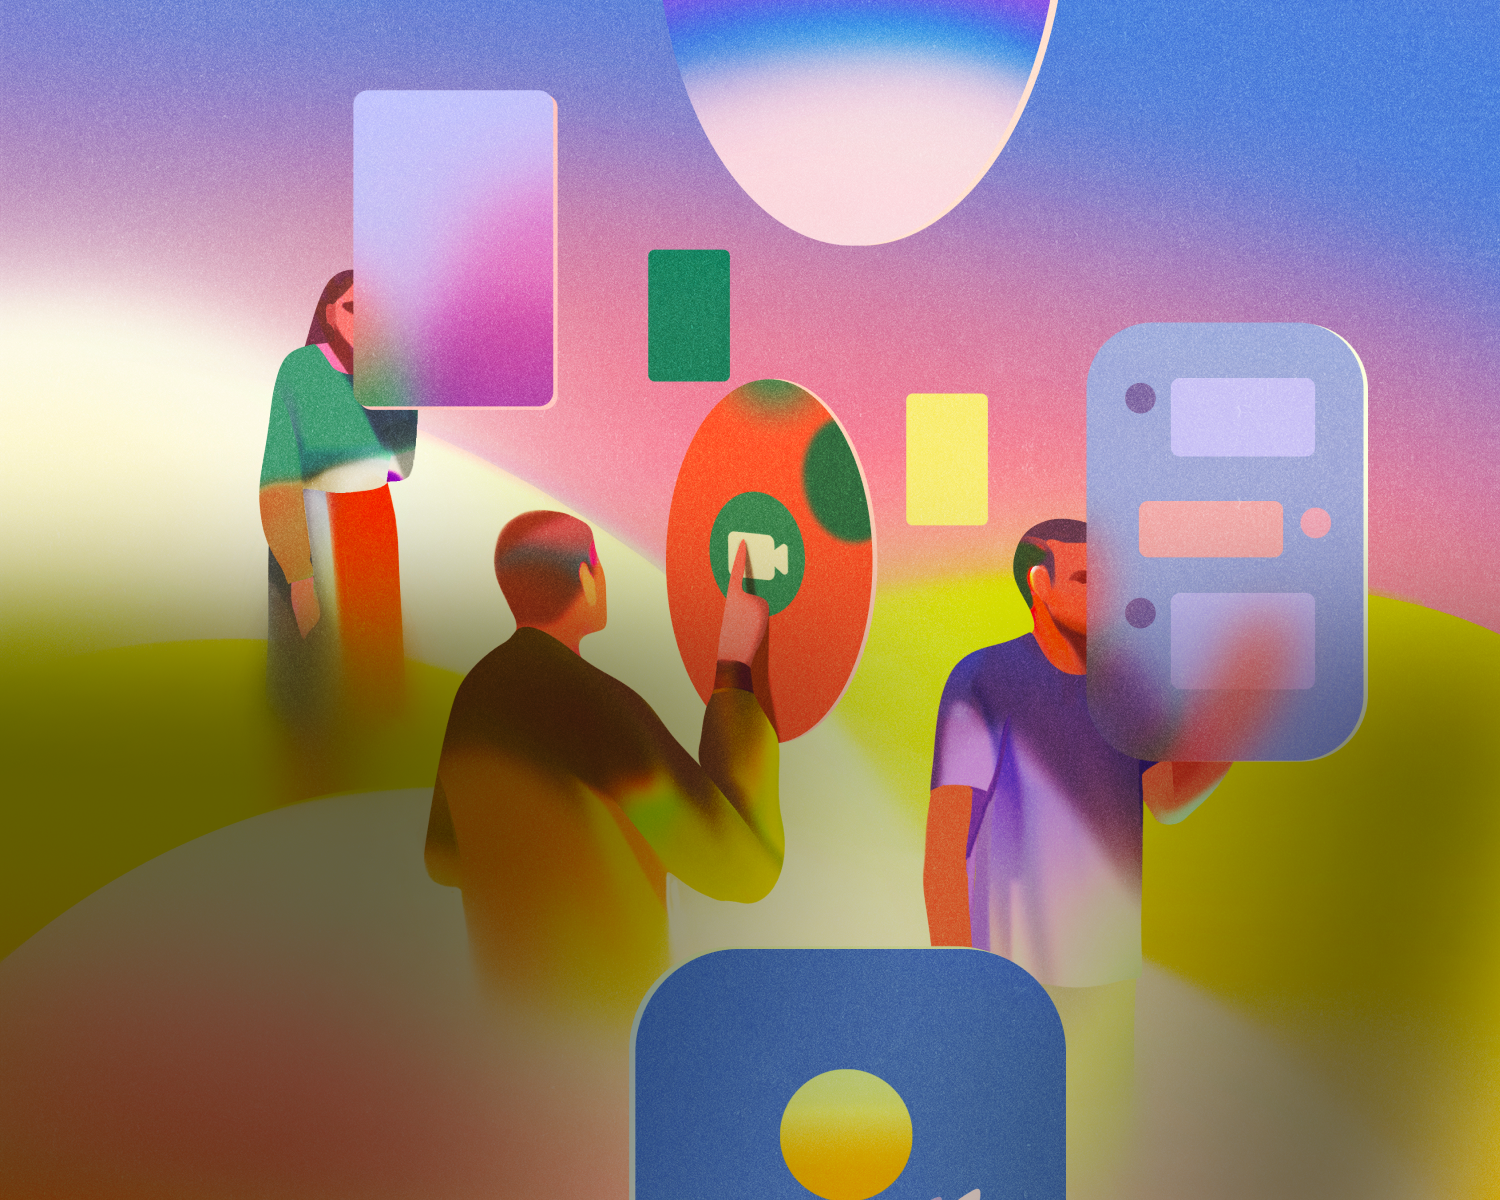 Abstract Illustration of 3 people interacting with different virtual components 